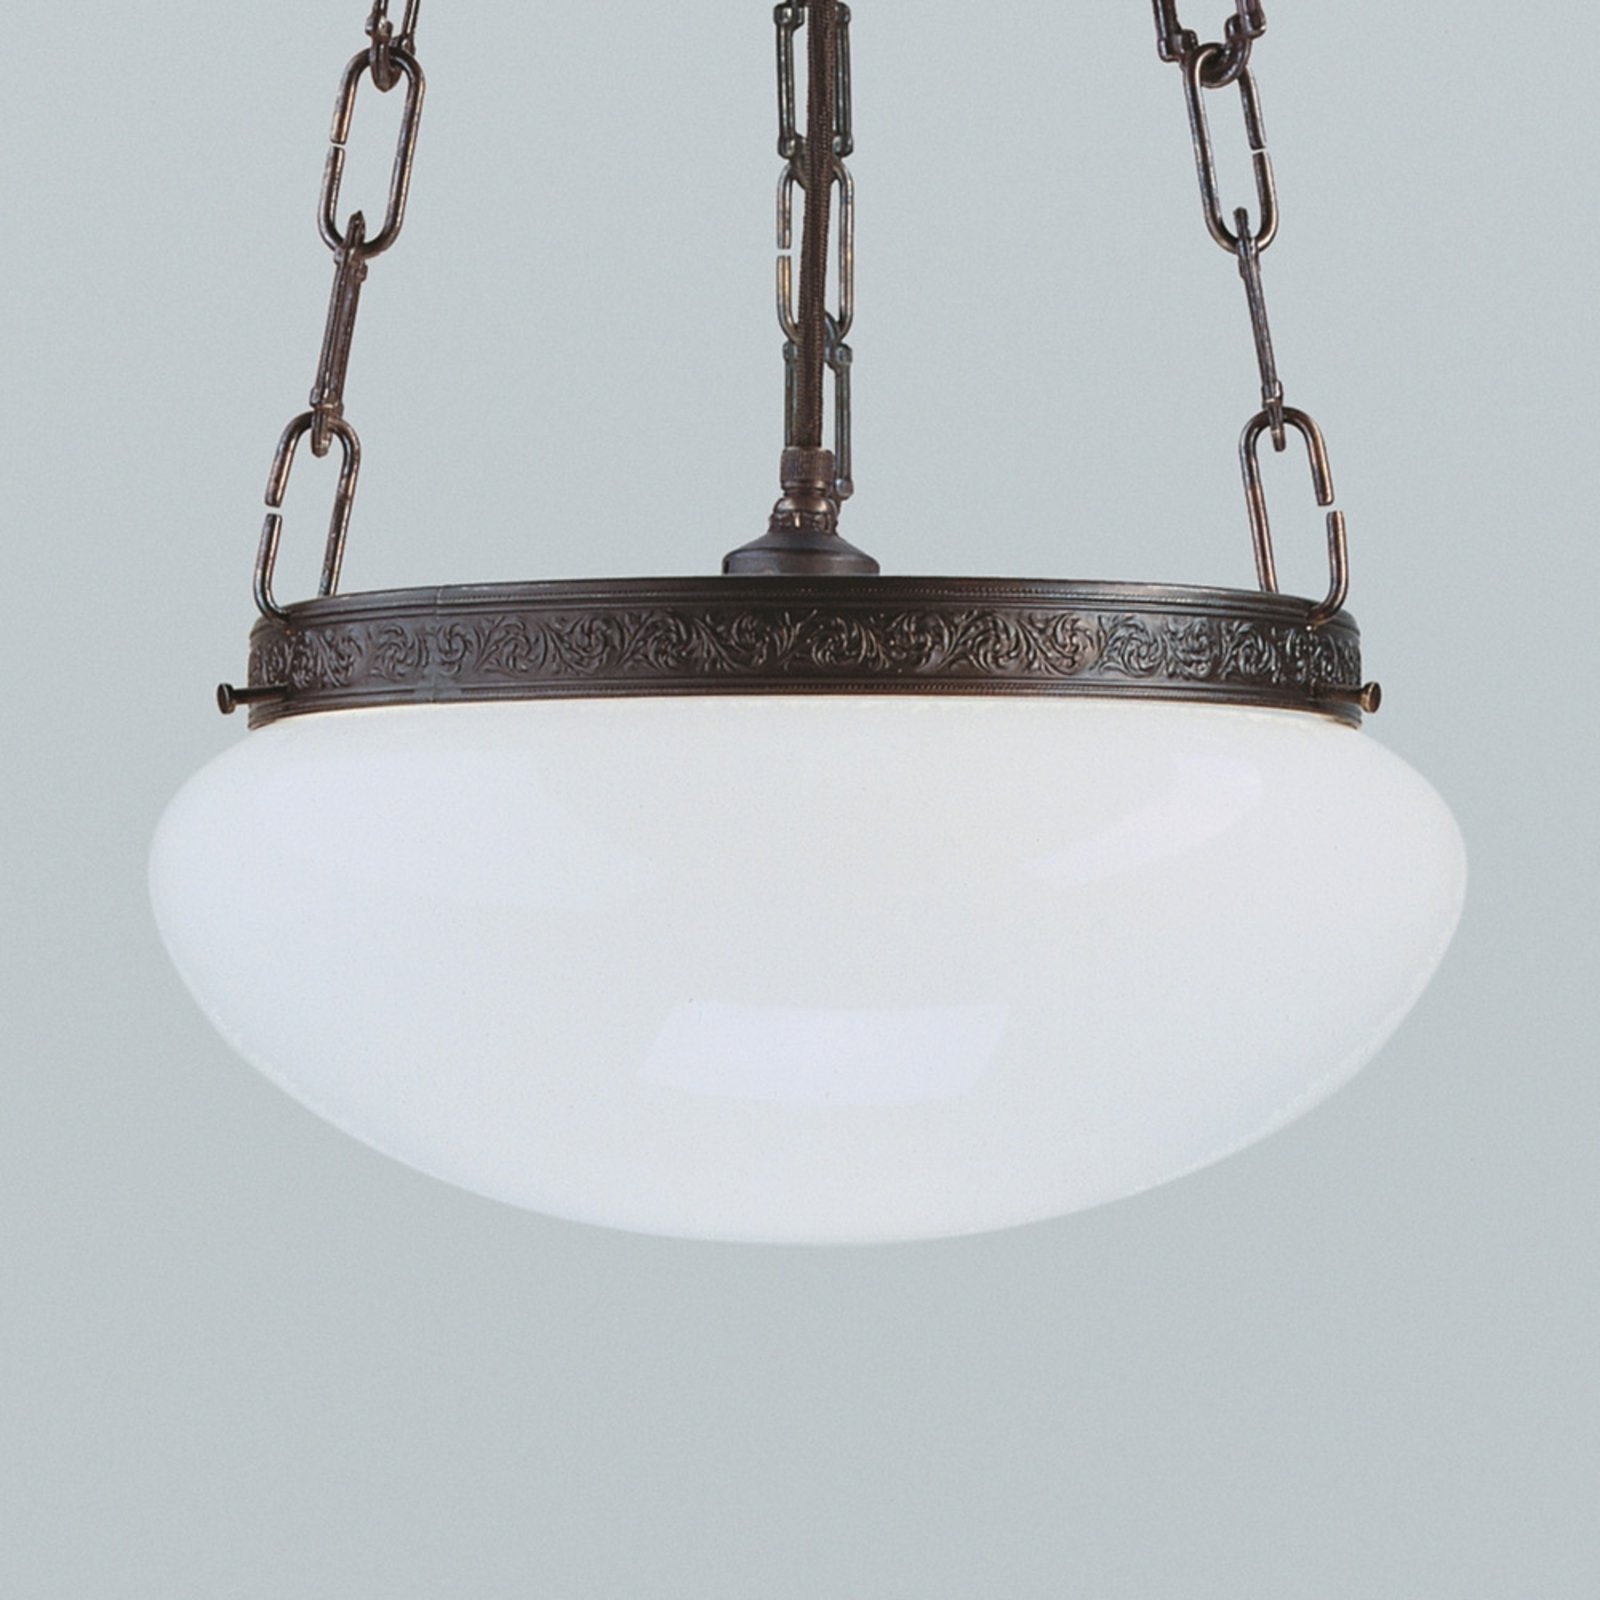 Verne hanging light with an antique look